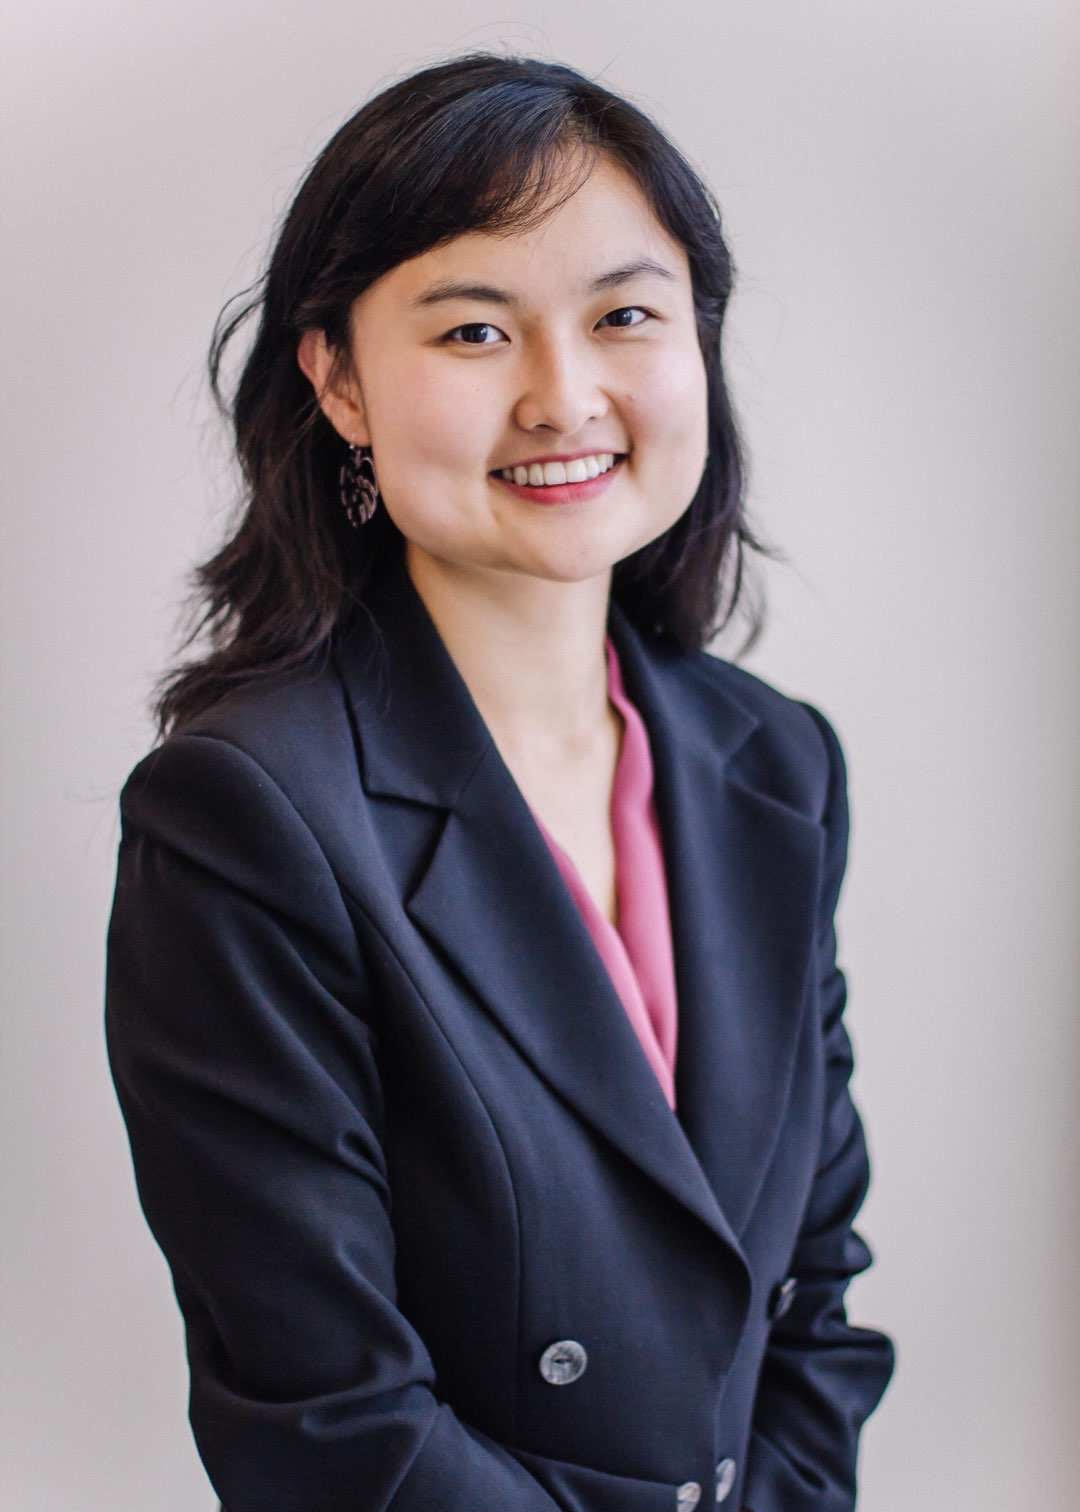 A professional headshot of Nemo Anyudan Zhao. She is wearing a dark blue blazer over a pink blouse.